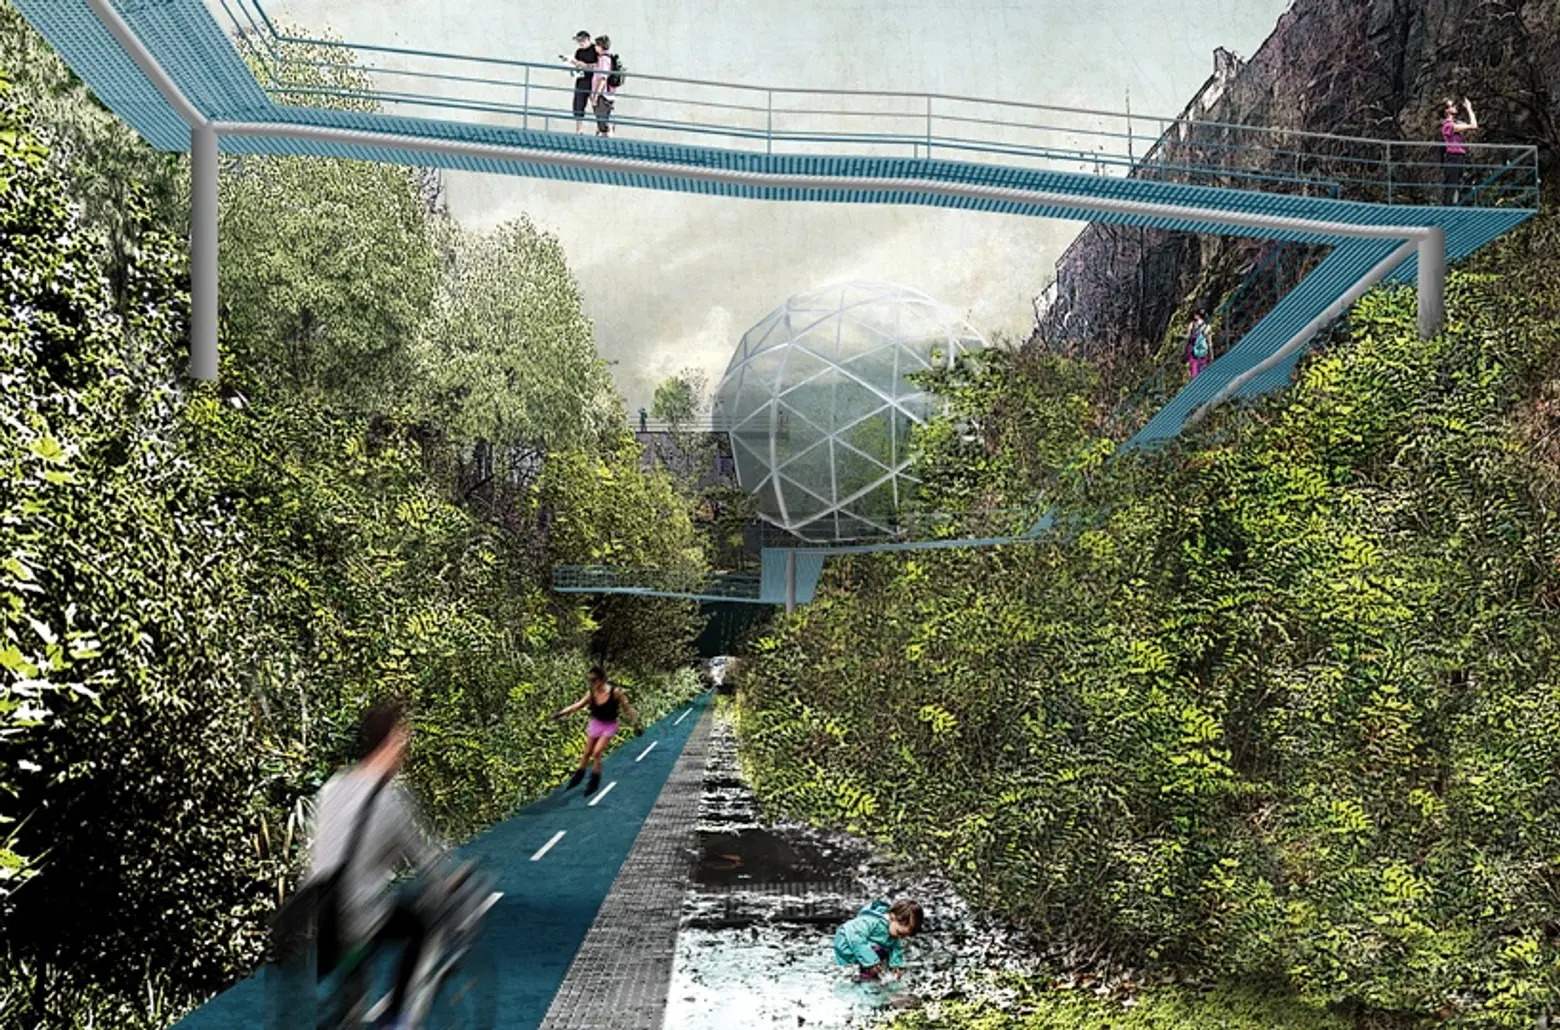 So+So Studio reimagines an abandoned Jersey City railroad as an elevated public park